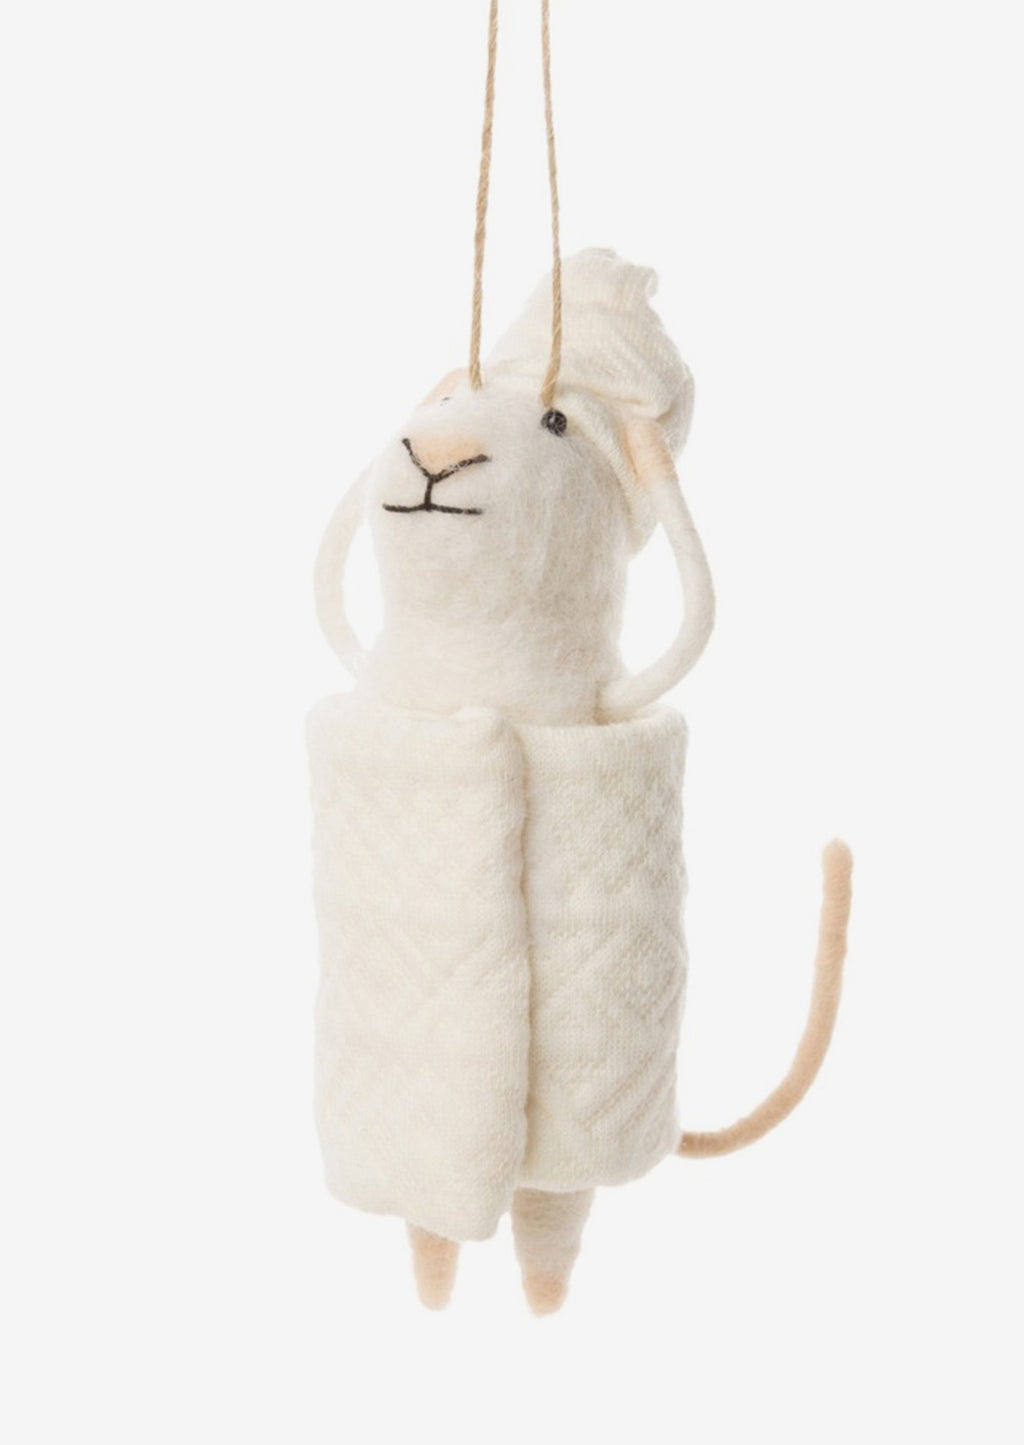 Spa Day: A felted mouse ornament wearing a towel.